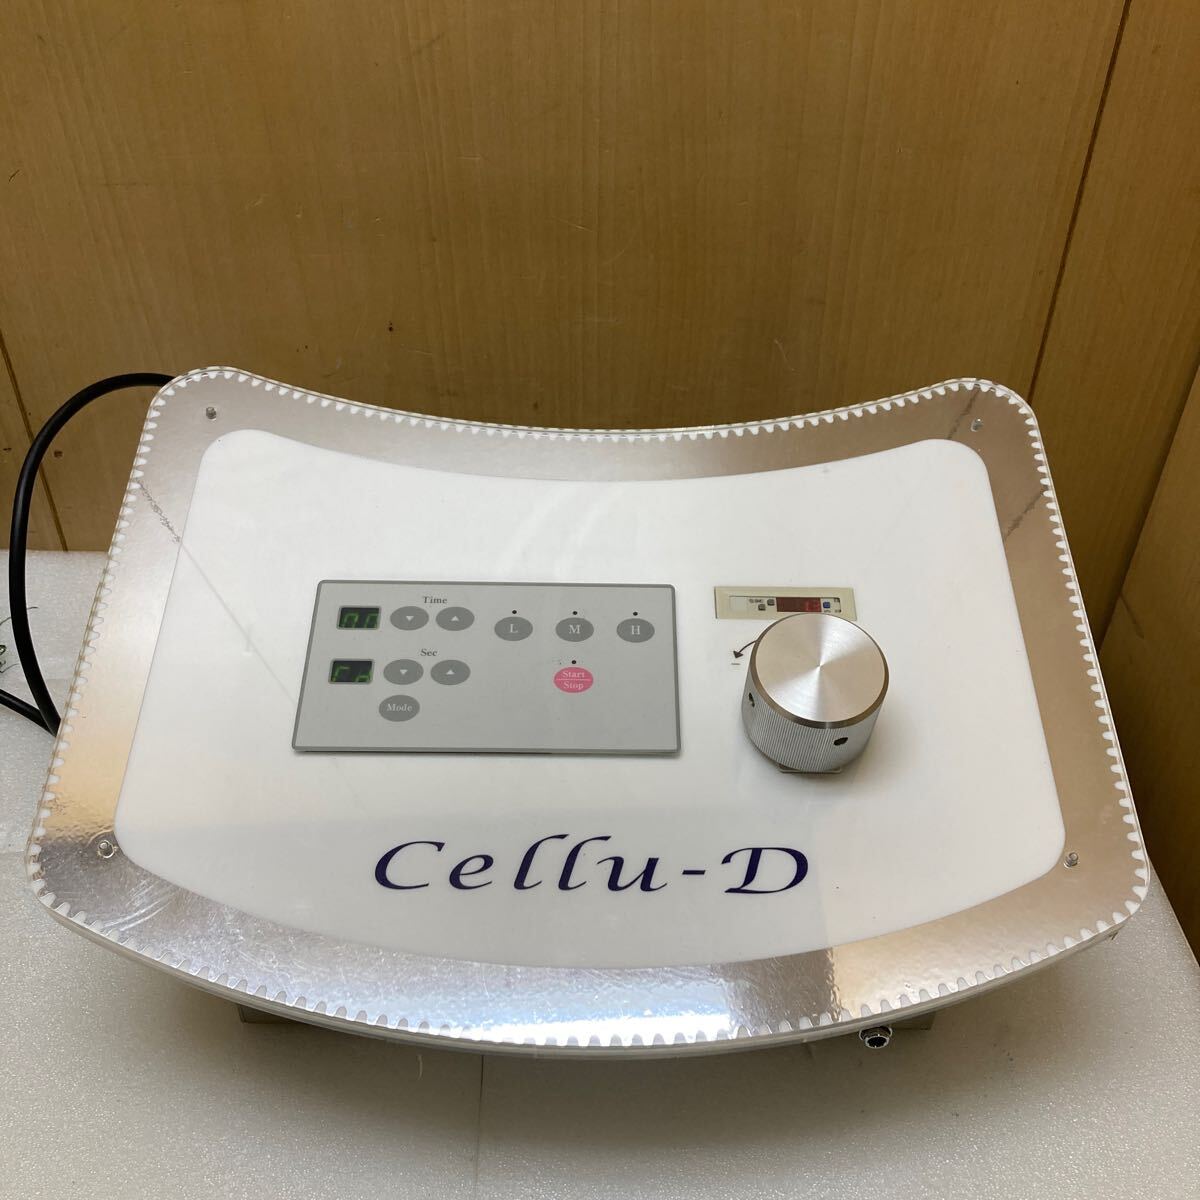 HY0068 Cellu-Dse Rudy beauty equipment details unknown CE-10100 electrification only verification present condition goods 0306